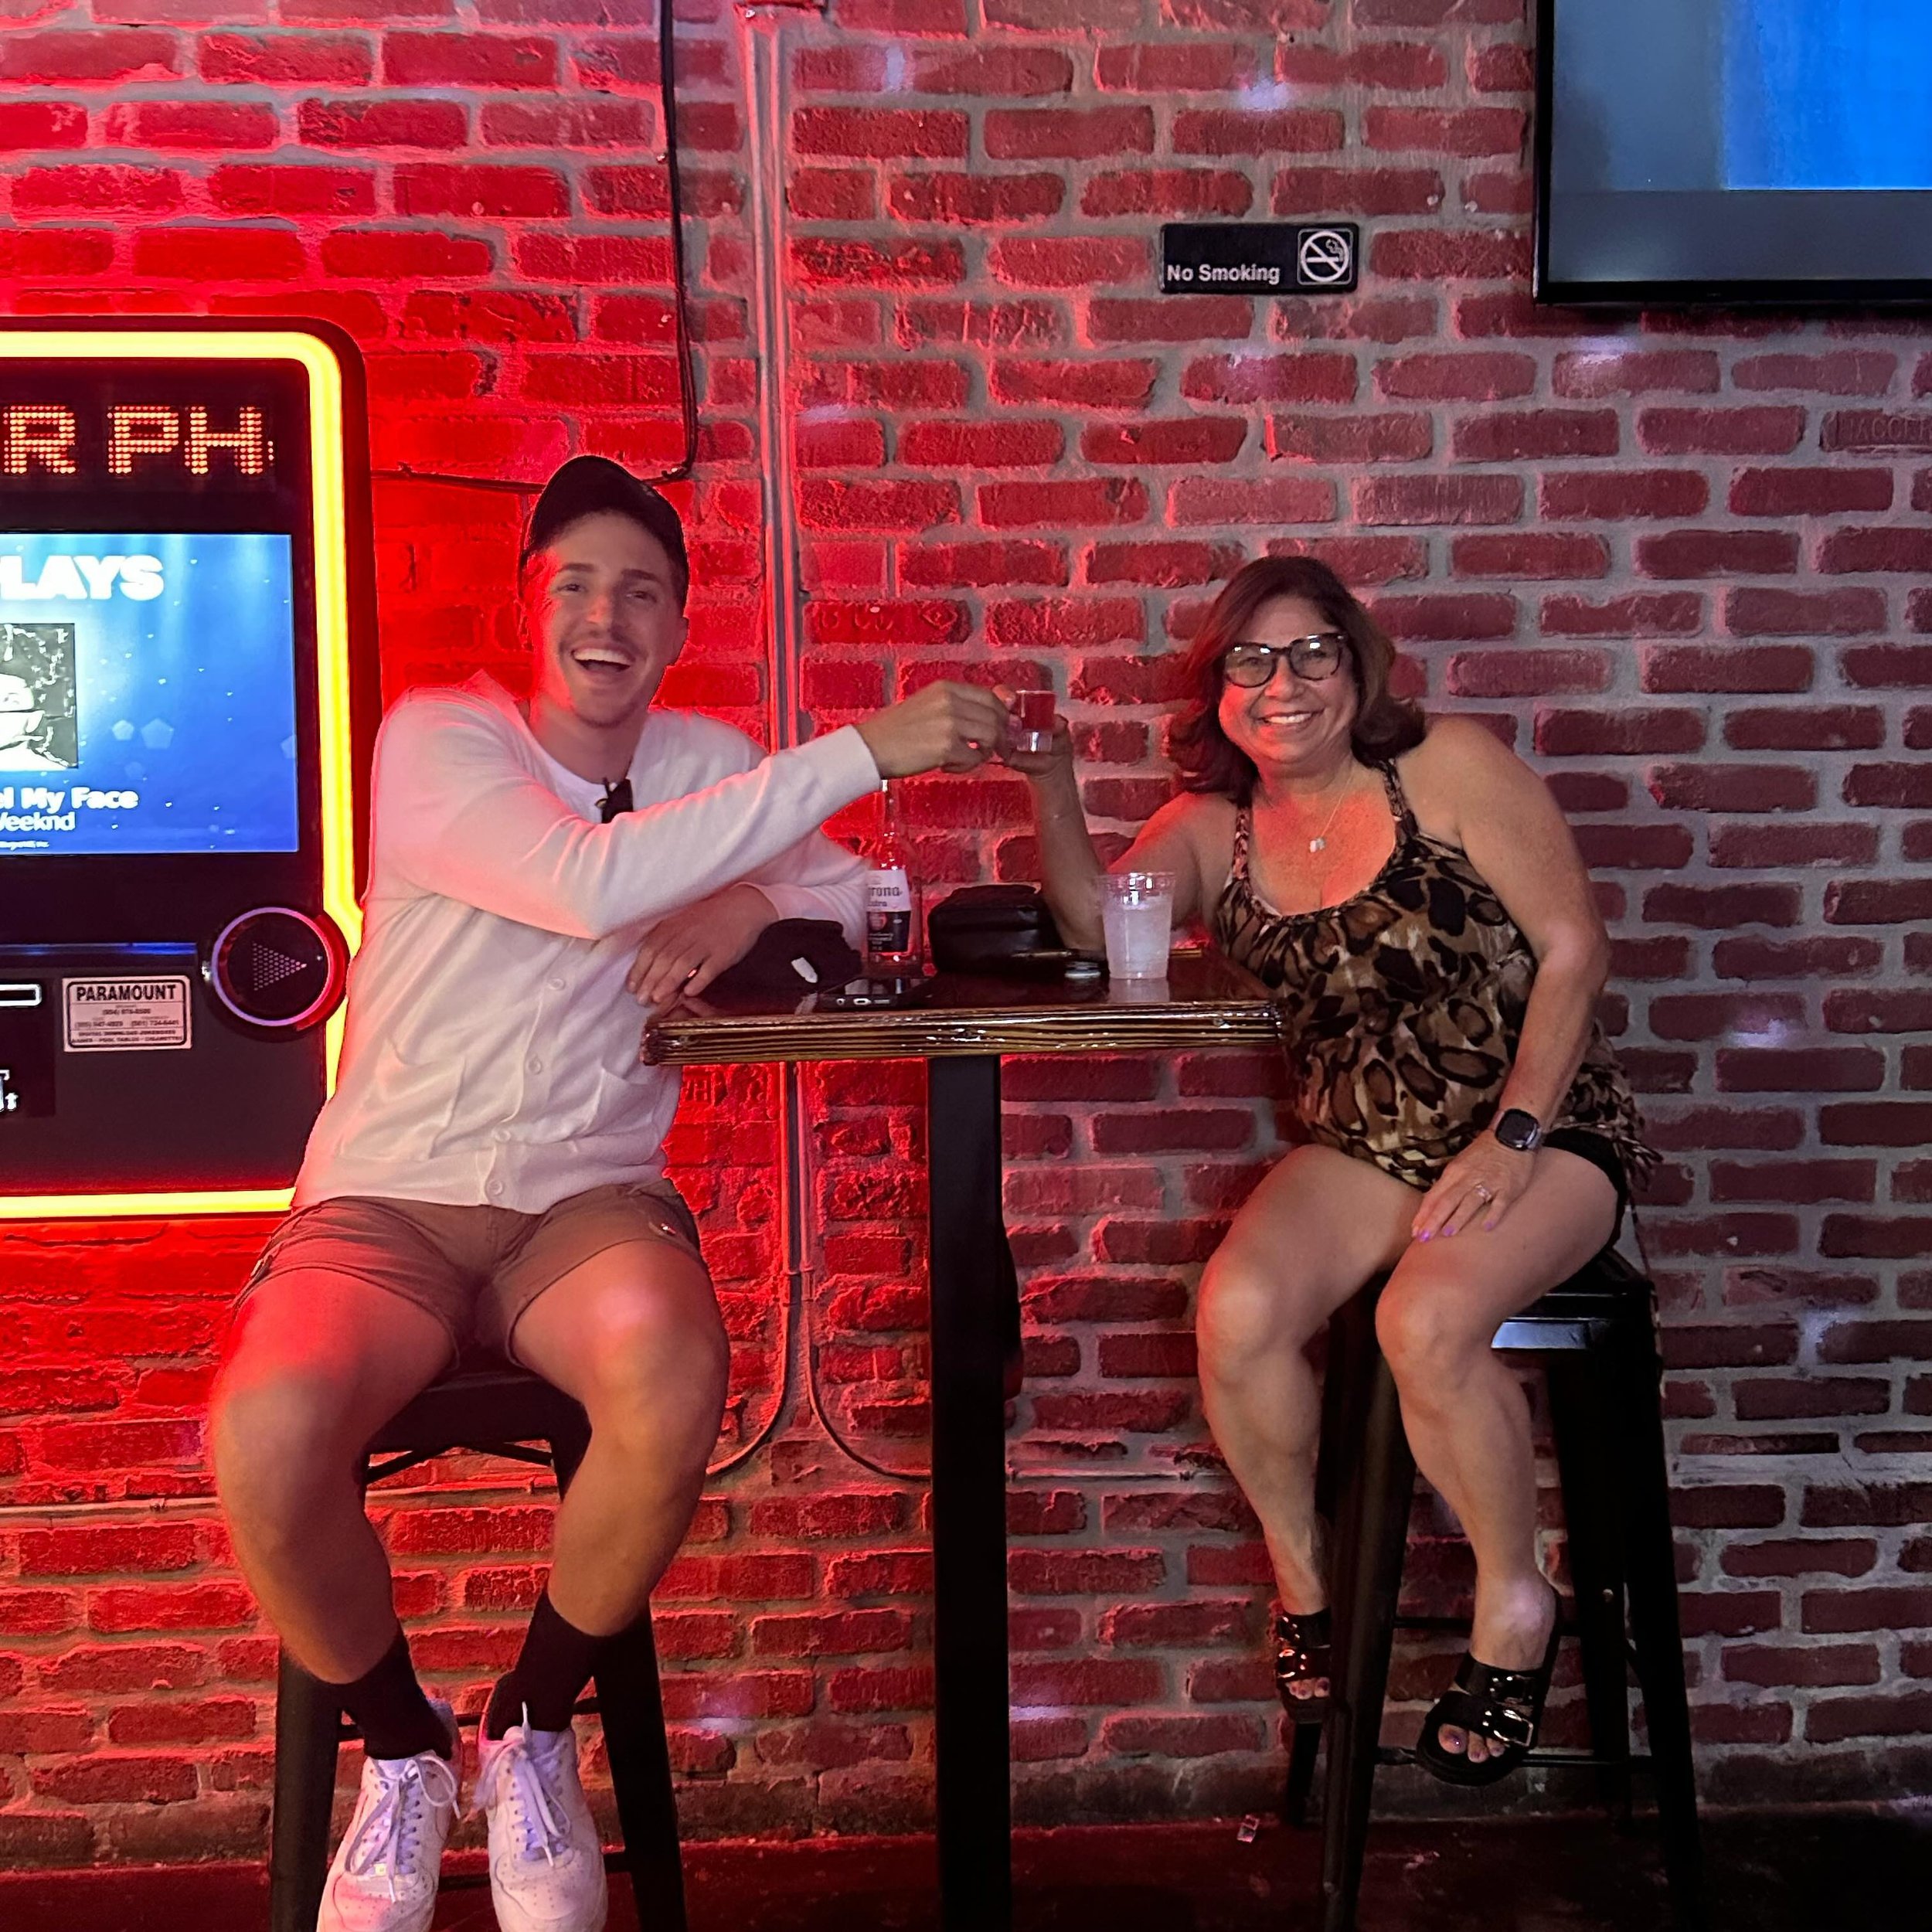 CHEERS TO OUR FIRST EVER WILLY&rsquo;S CUSTOMERS! 🍻

HAPPY HOUR. 5PM - 7PM 🍸 
$5 beers / $8 specialty cocktails 
NO COVER. OPEN TO 3AM. 21+ 

365 NW 24TH ST. WYNWOOD.